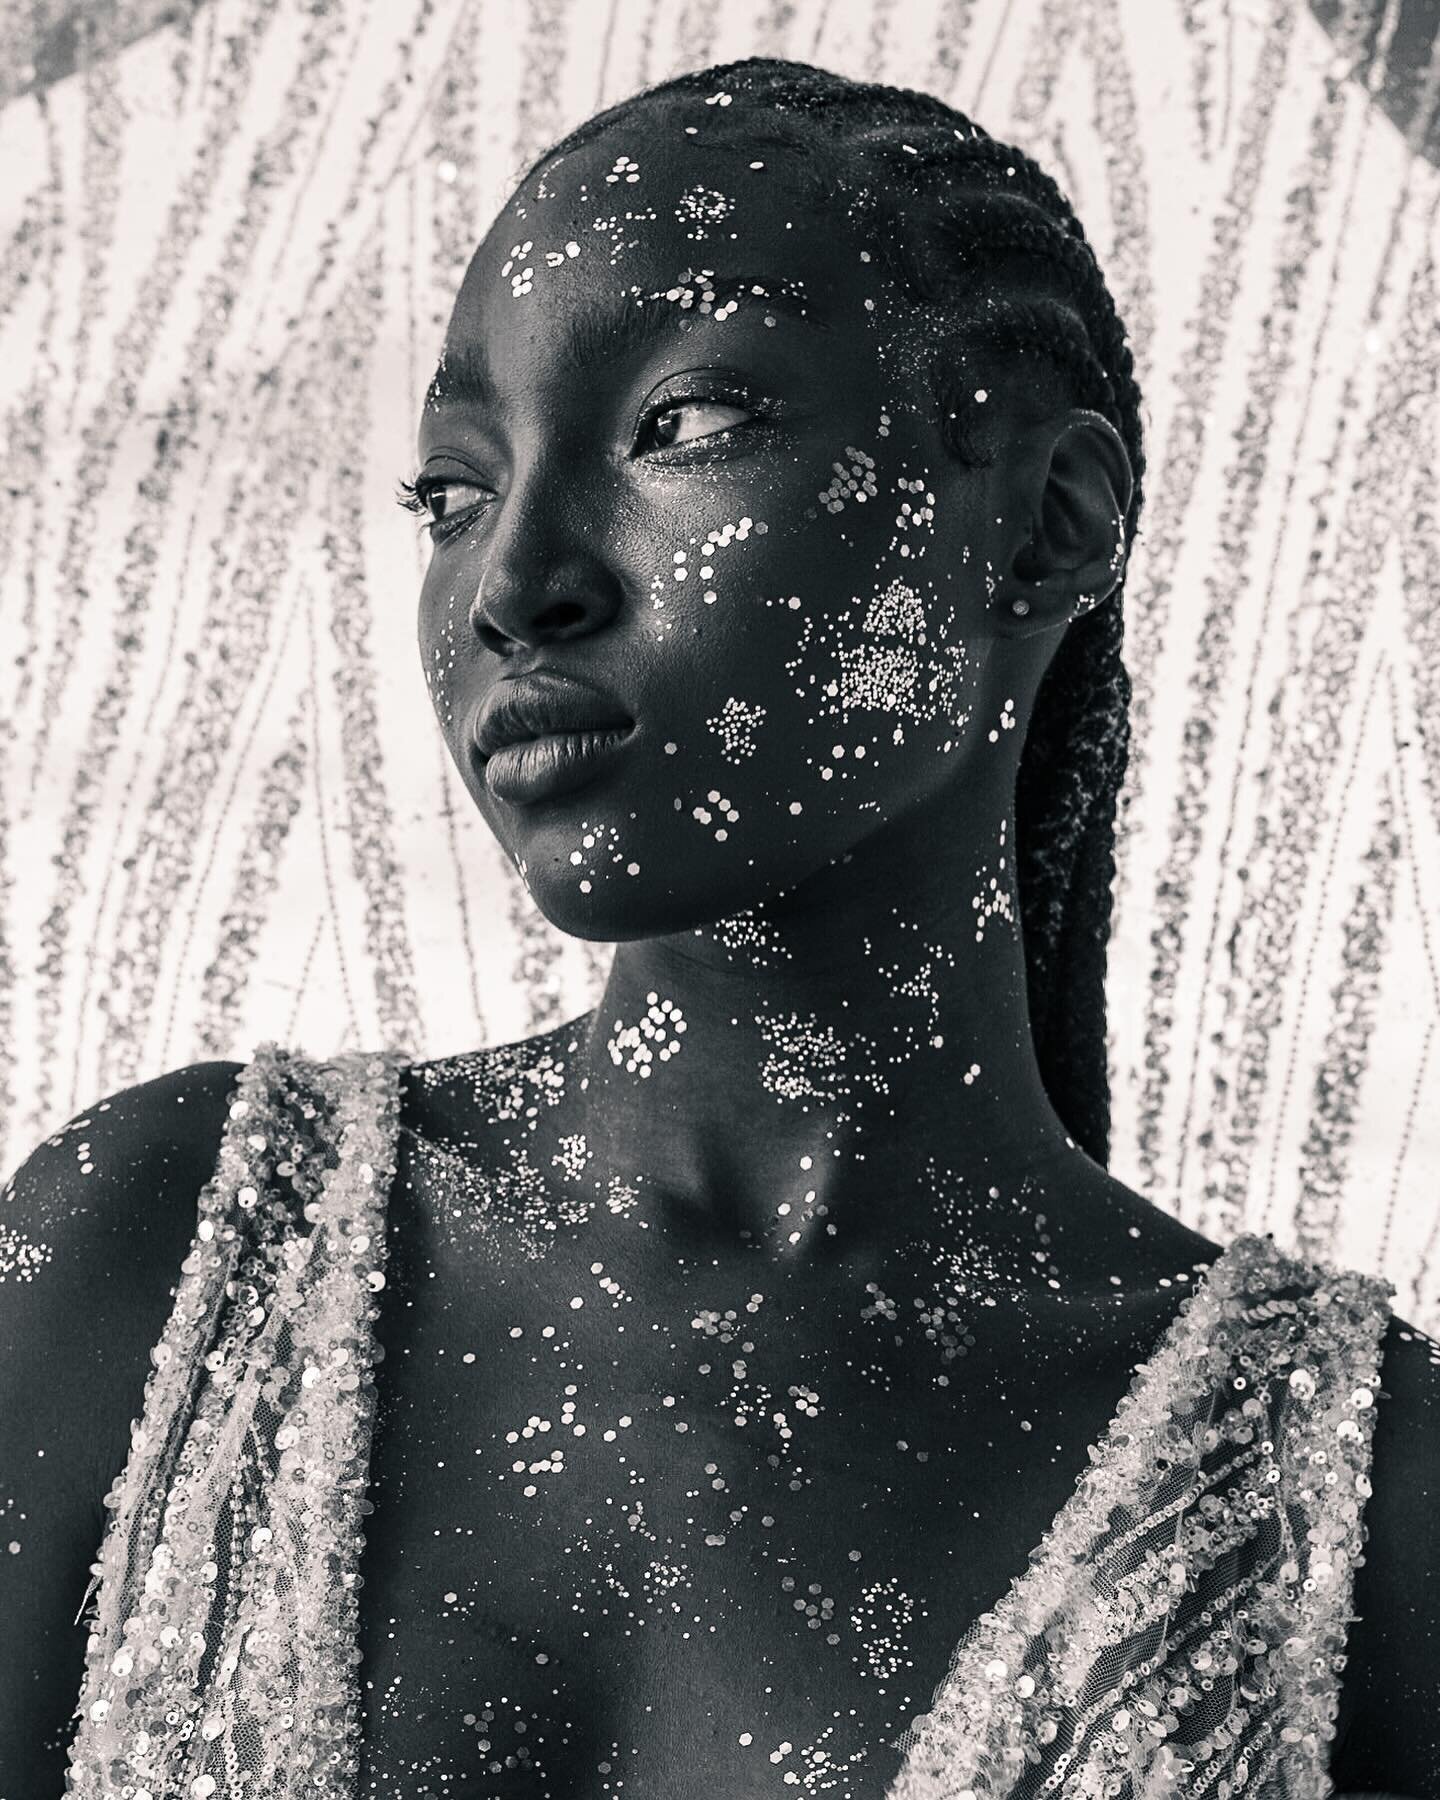 Stardust ✨

Outtakes from my Harper&rsquo;s editorial &ldquo;Shine Bright&rdquo; featuring Bahamian model Daniella 📸🇧🇸
 
With the best team! 🩵
Photography Robyn Damianos: @robyndamianosphotography 
Model: @daniella.beauu 
Designer: @javiebethell_